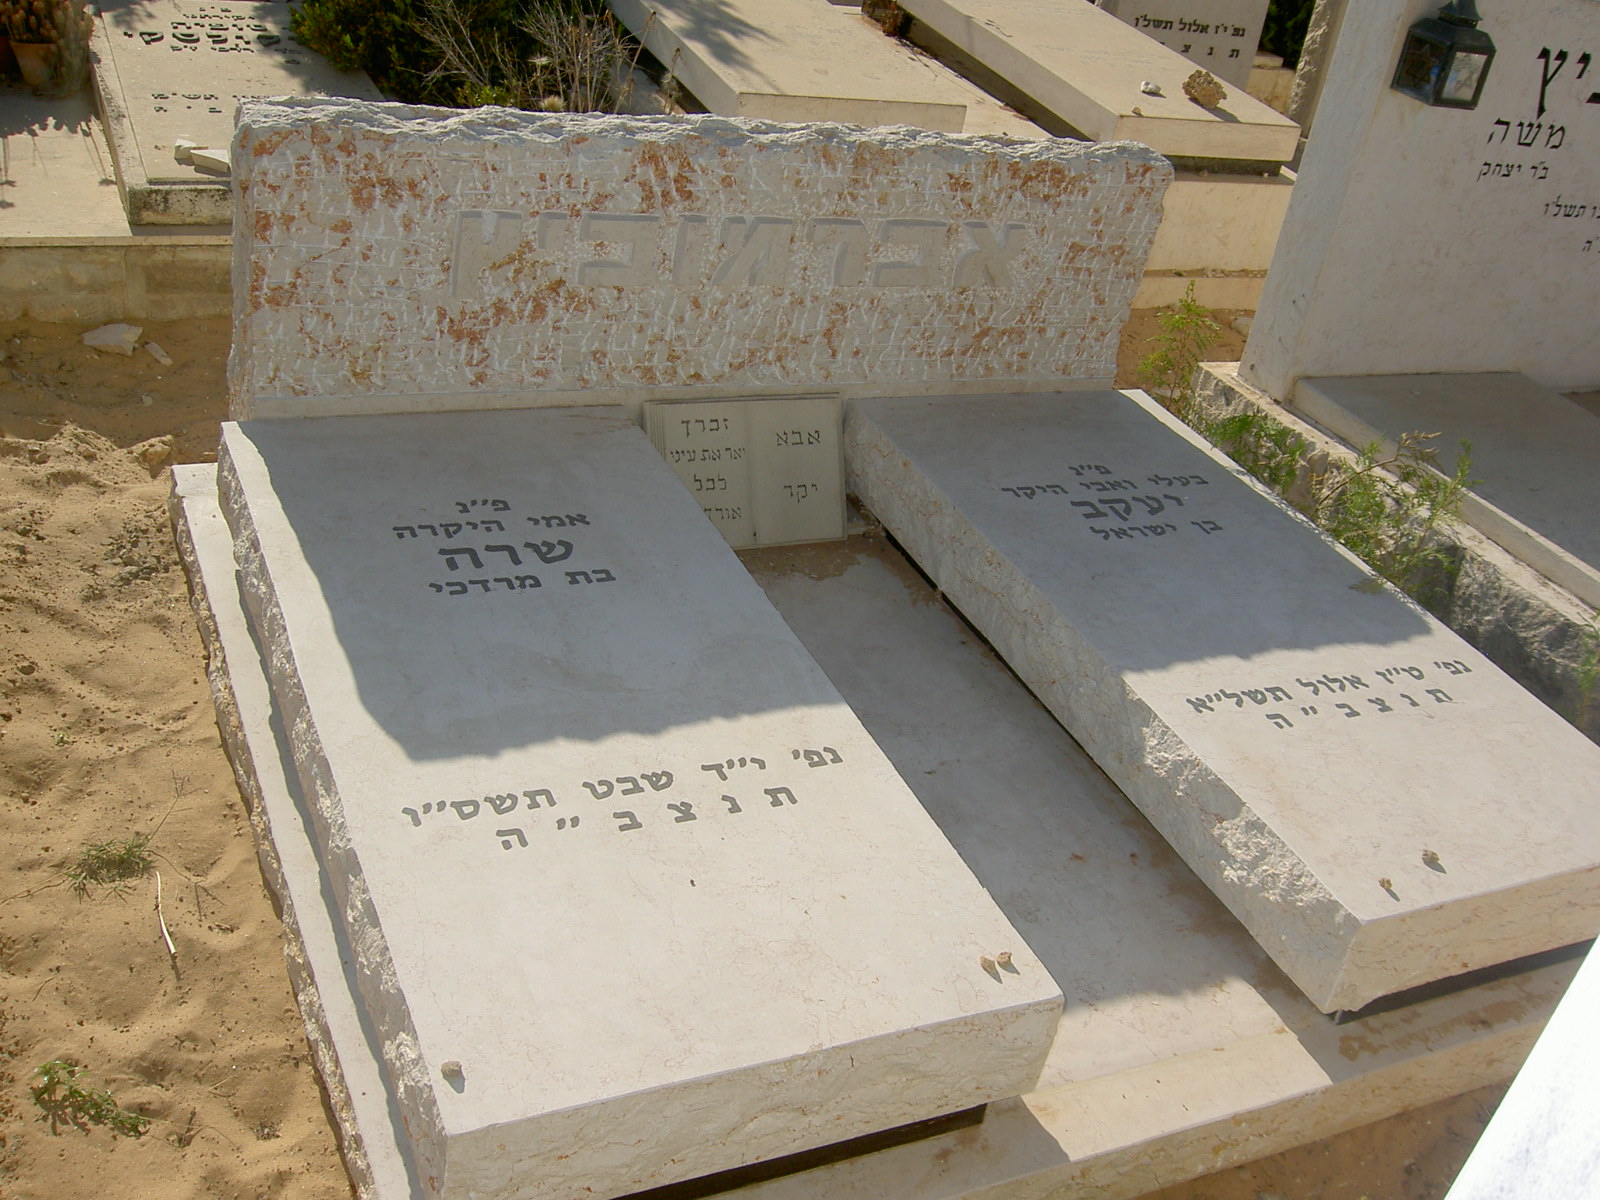 Taken on June 12th, 2006 at the Jewish Cemetery "Holon" at IL(Holon) for Dan area and sourced from CEM(IL-Holon),JG029873.